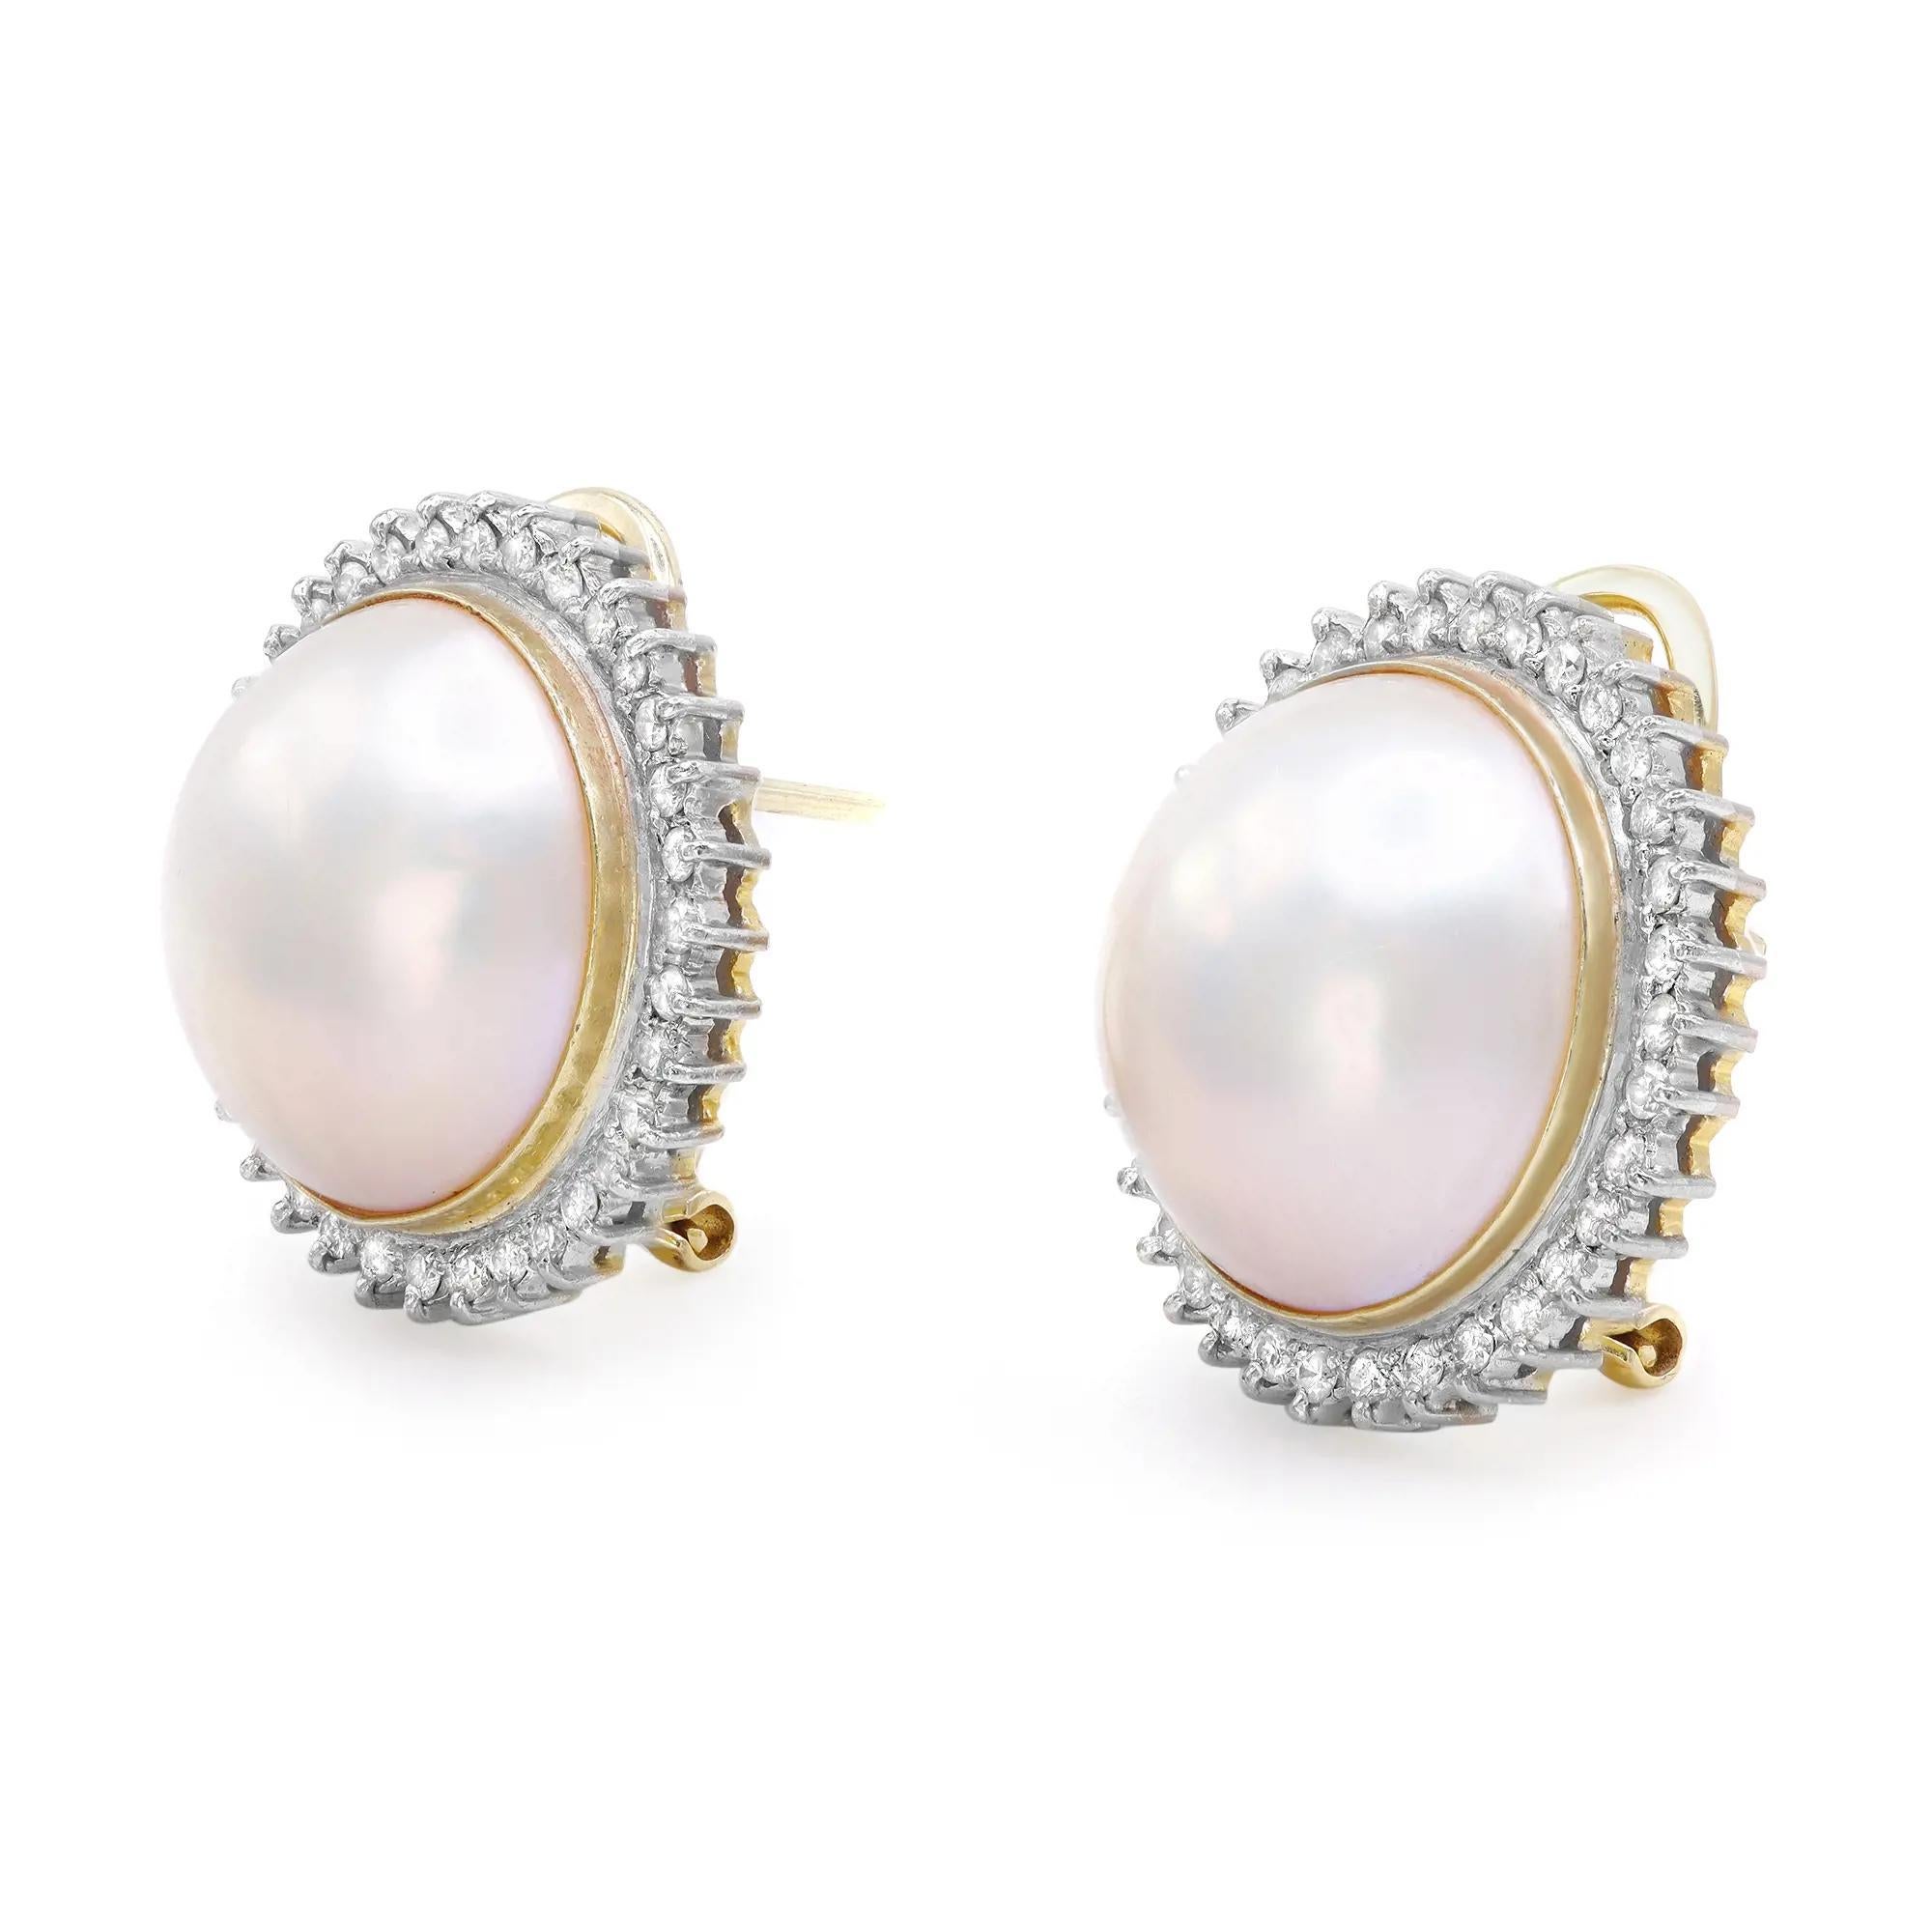 Vintage bold, beautiful pearl and diamond earrings. These earrings bring an elegant twist to a classic style that's great for any special occasion. Crafted in 14K yellow gold. Omega backs. Total weight: 14.80 grams. Total diamond weight: aprox.